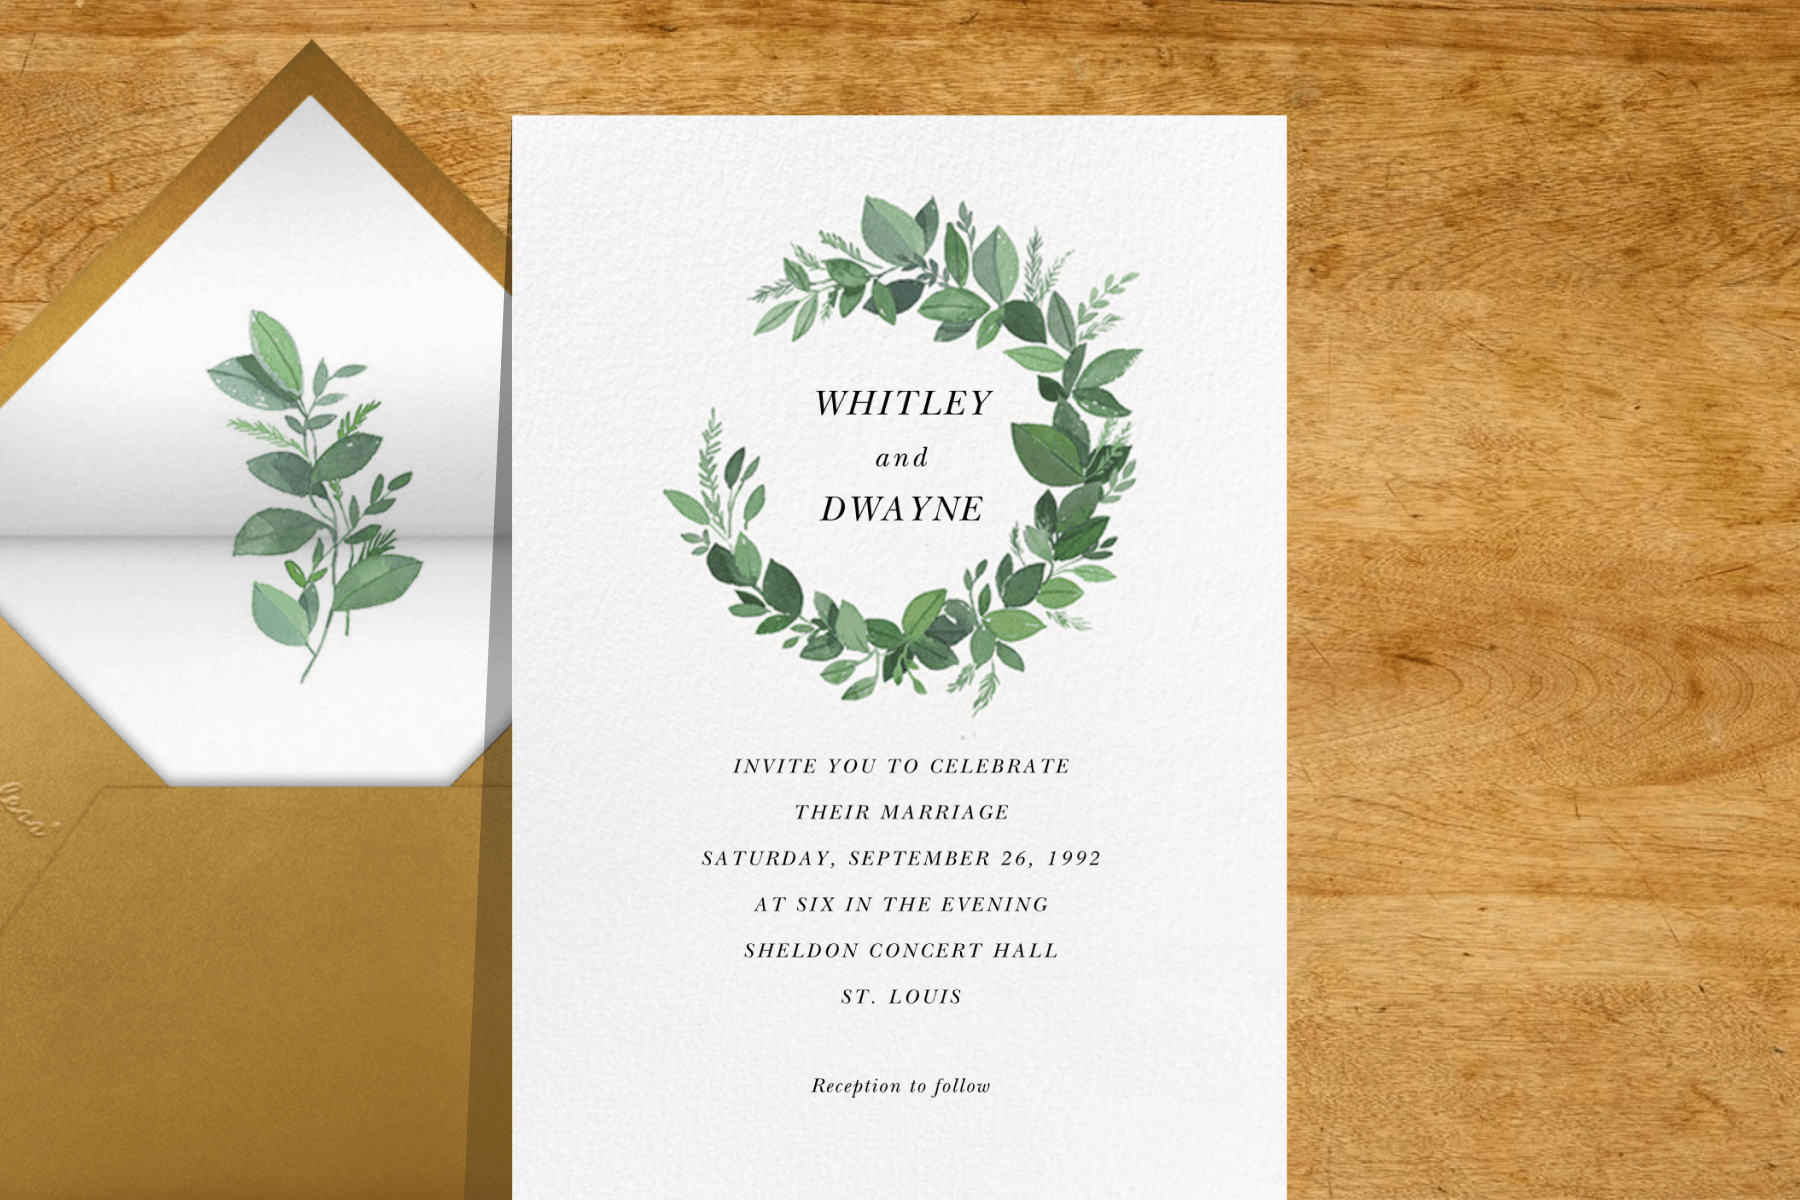 wedding invitation with a green leaf wreath around the names